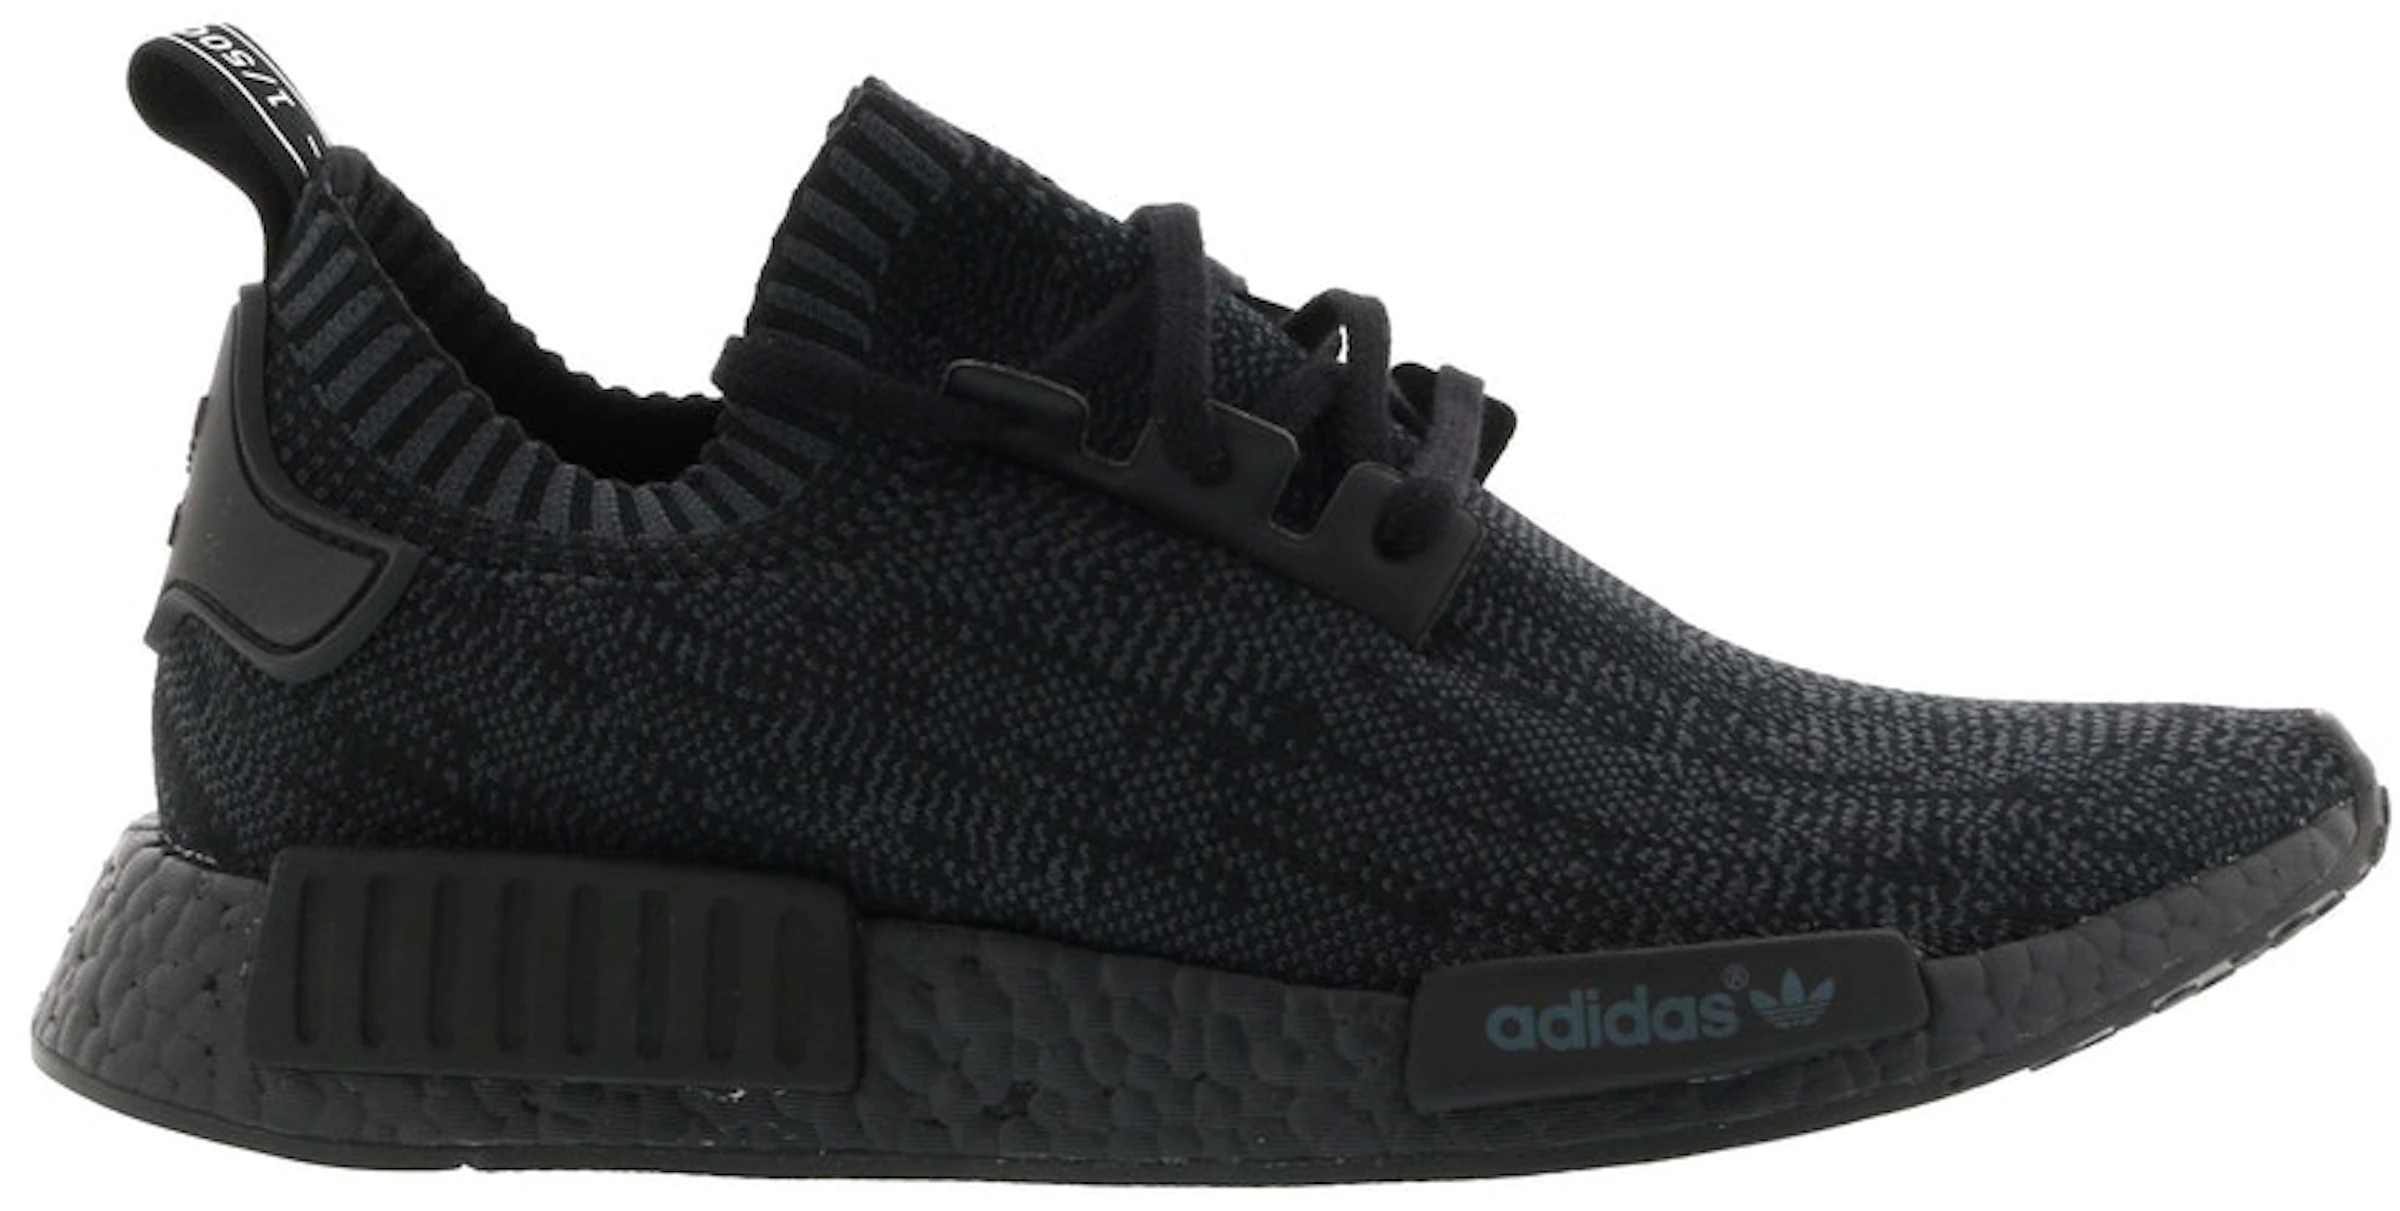 adidas NMD R1 and Pitch Black - S80489 - ES